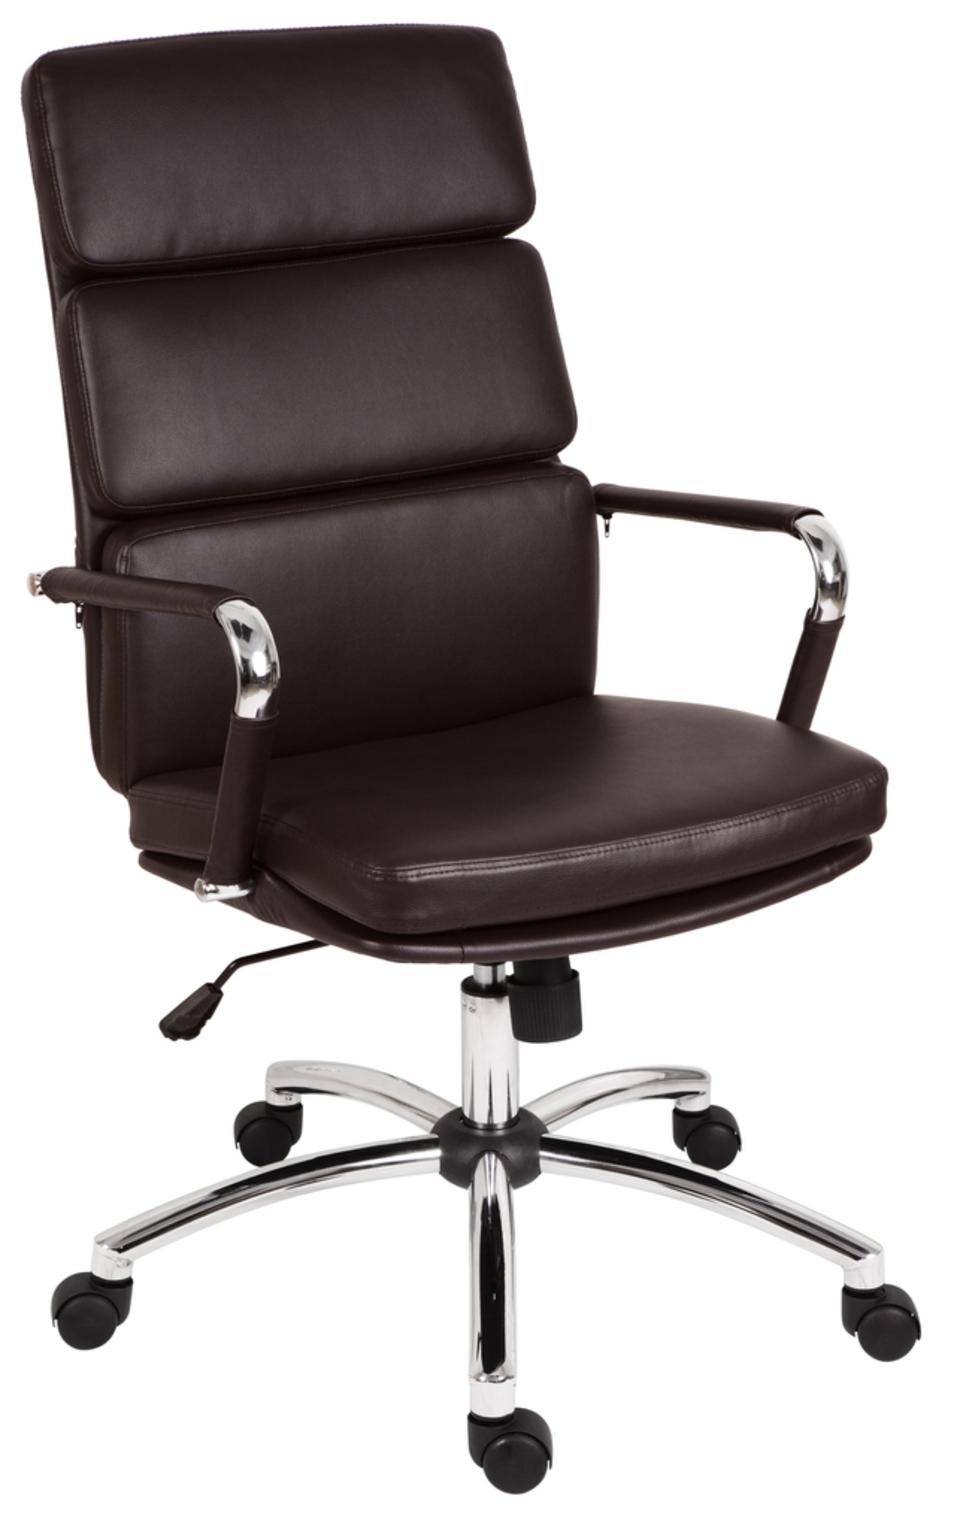 Deco Executive Faux Leather Chair